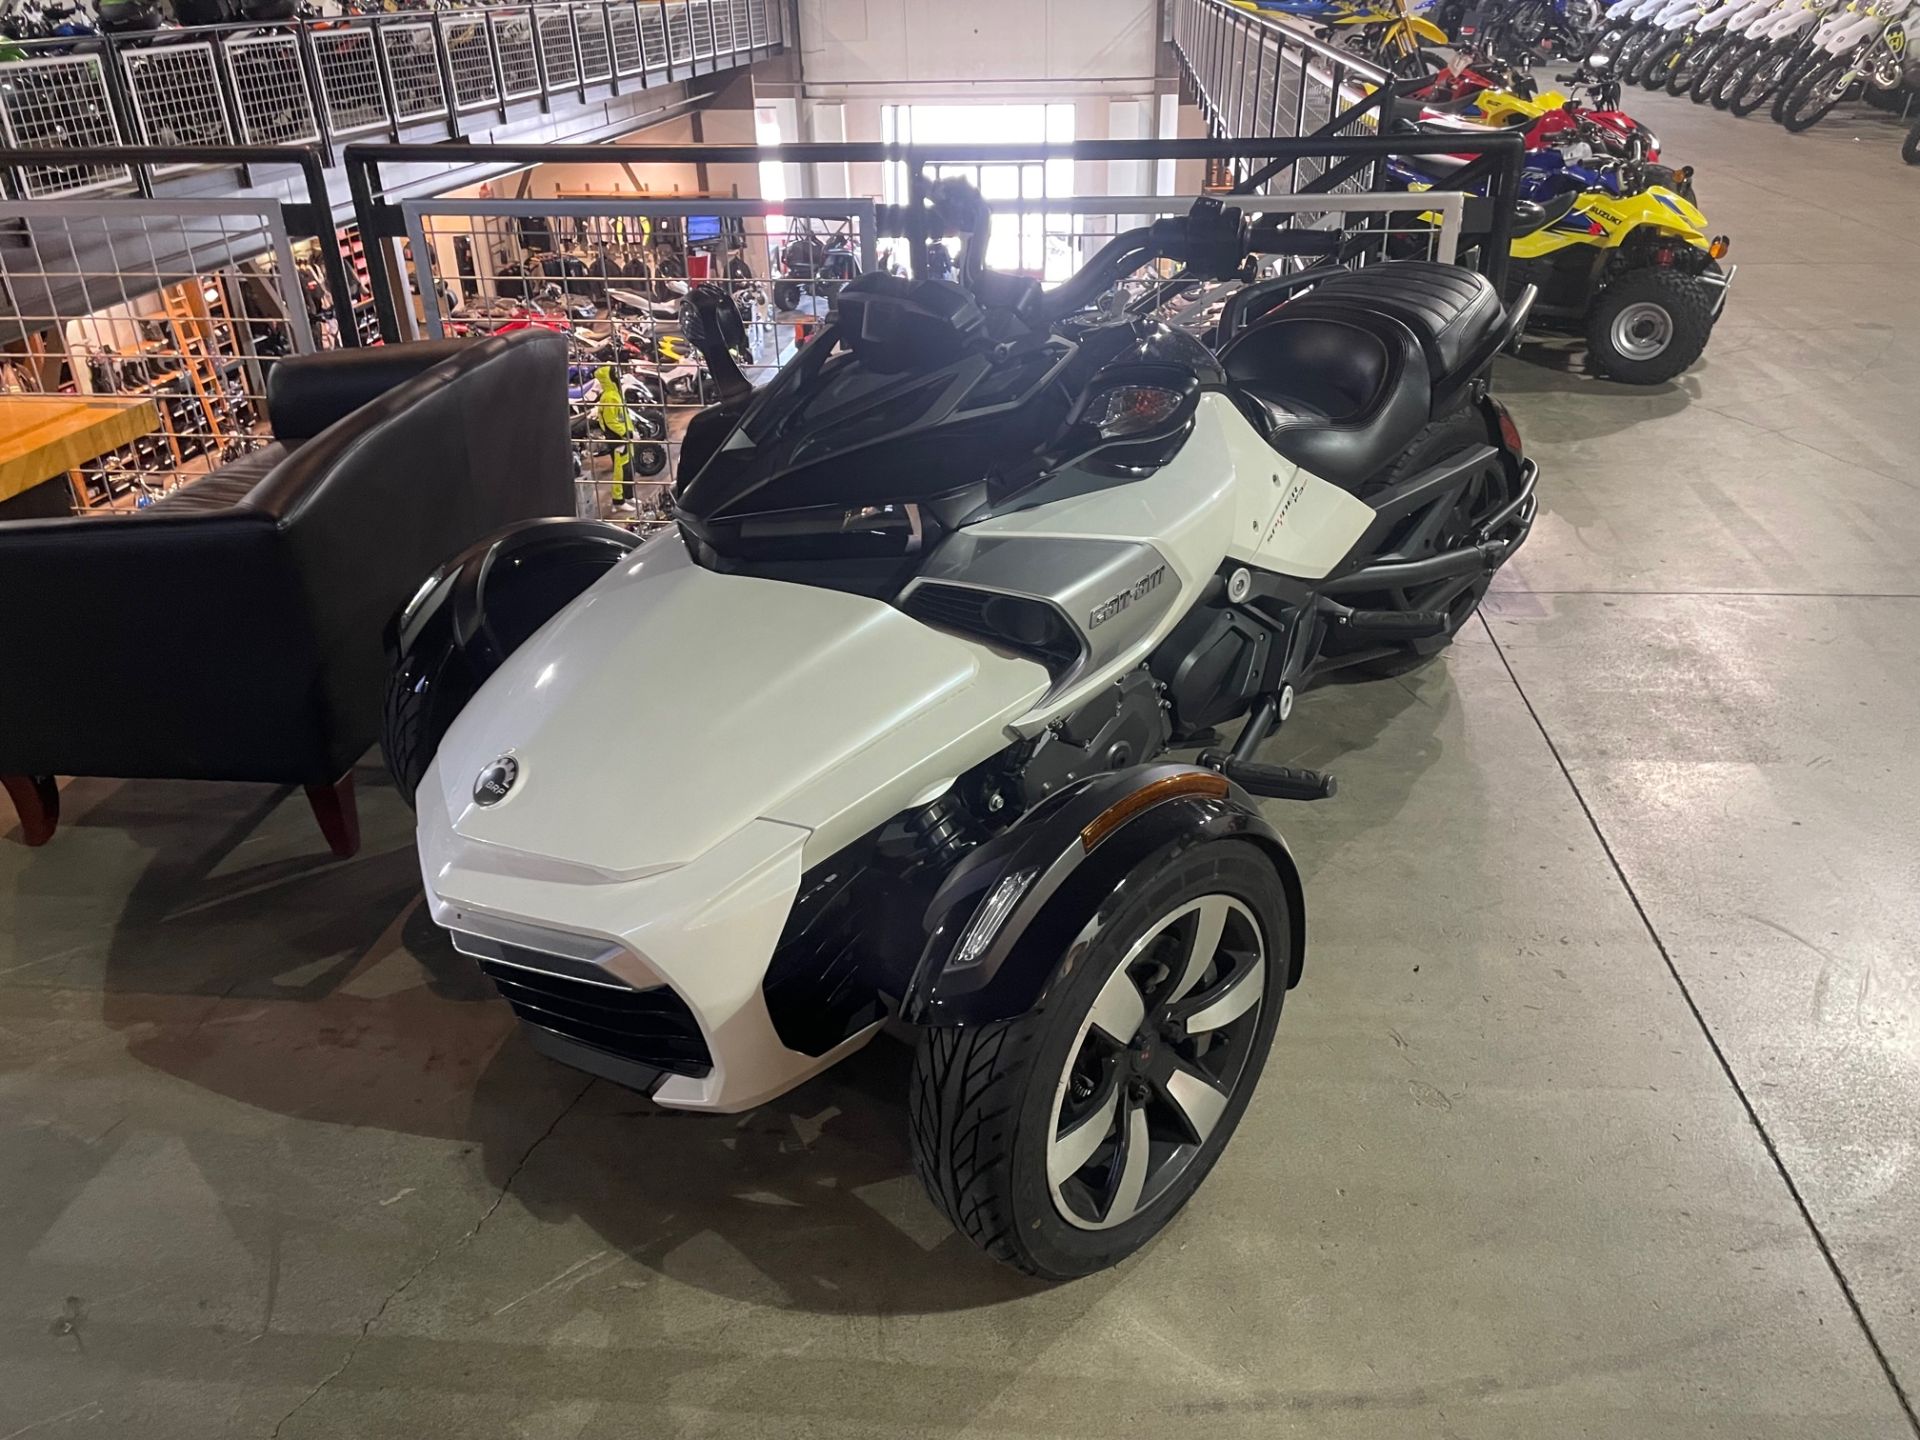 2016 Can-Am Spyder F3-S SE6 in Woodinville, Washington - Photo 3